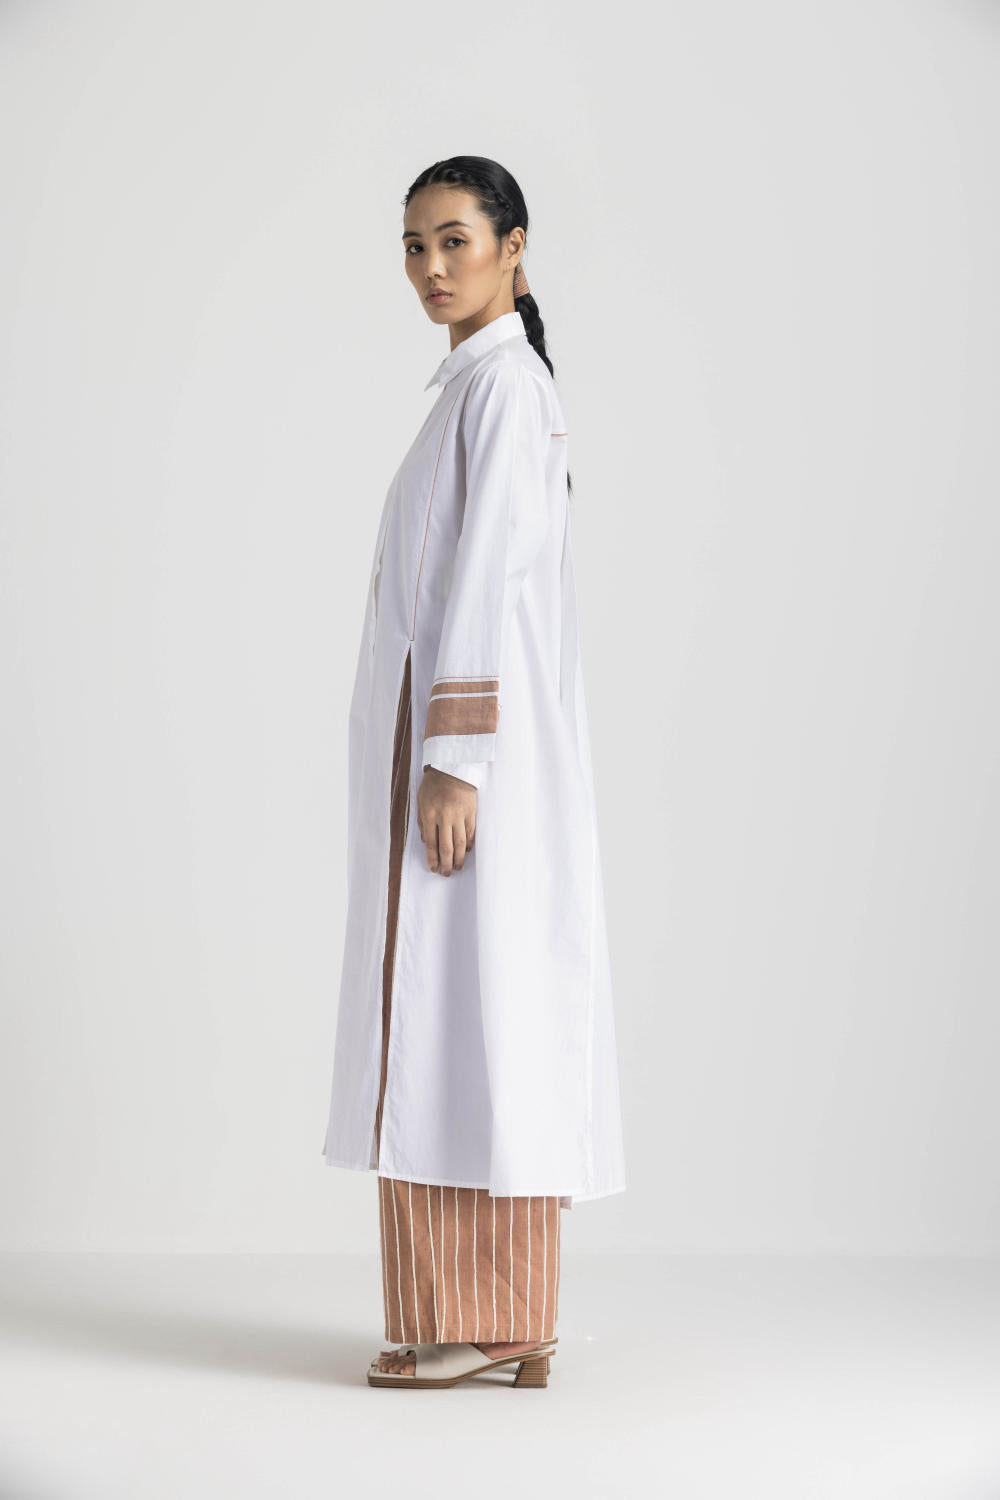 WIDE SLEEVE SHIRT CO ORD - CHAMPAGNE